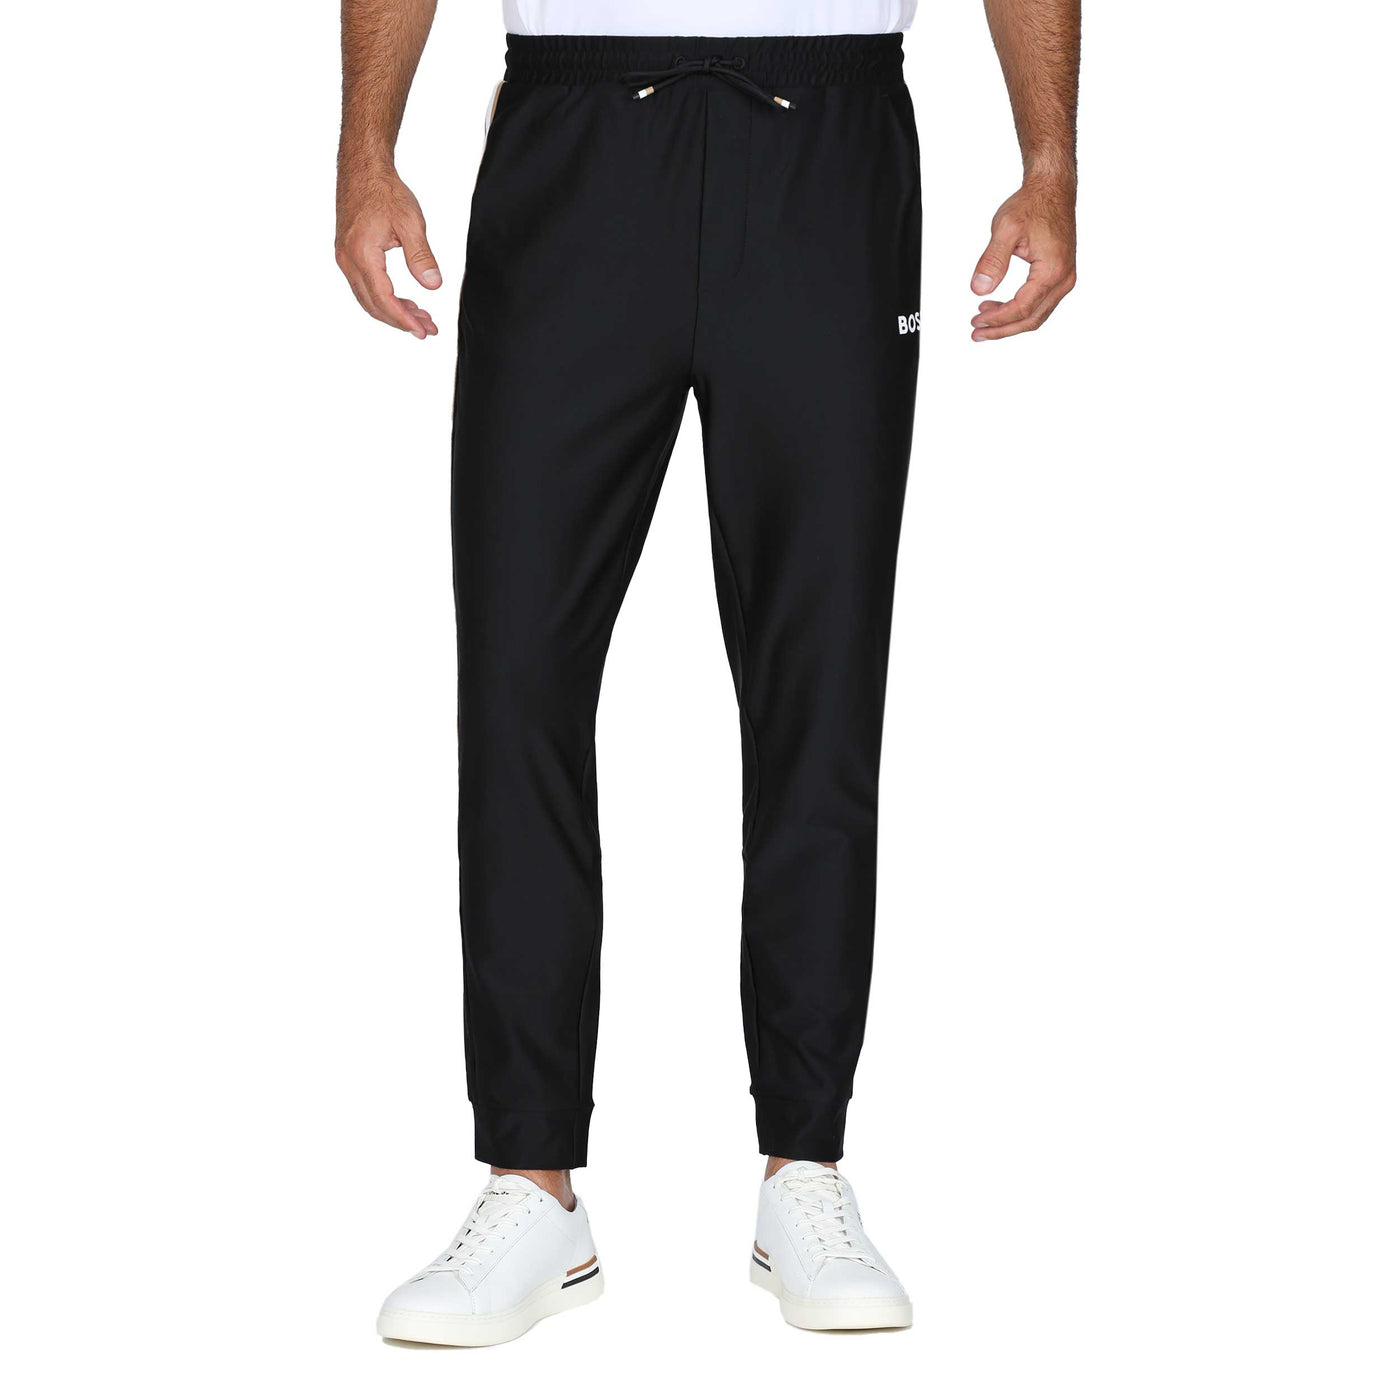 BOSS Hicon MB 1 Sweat Pant in Black